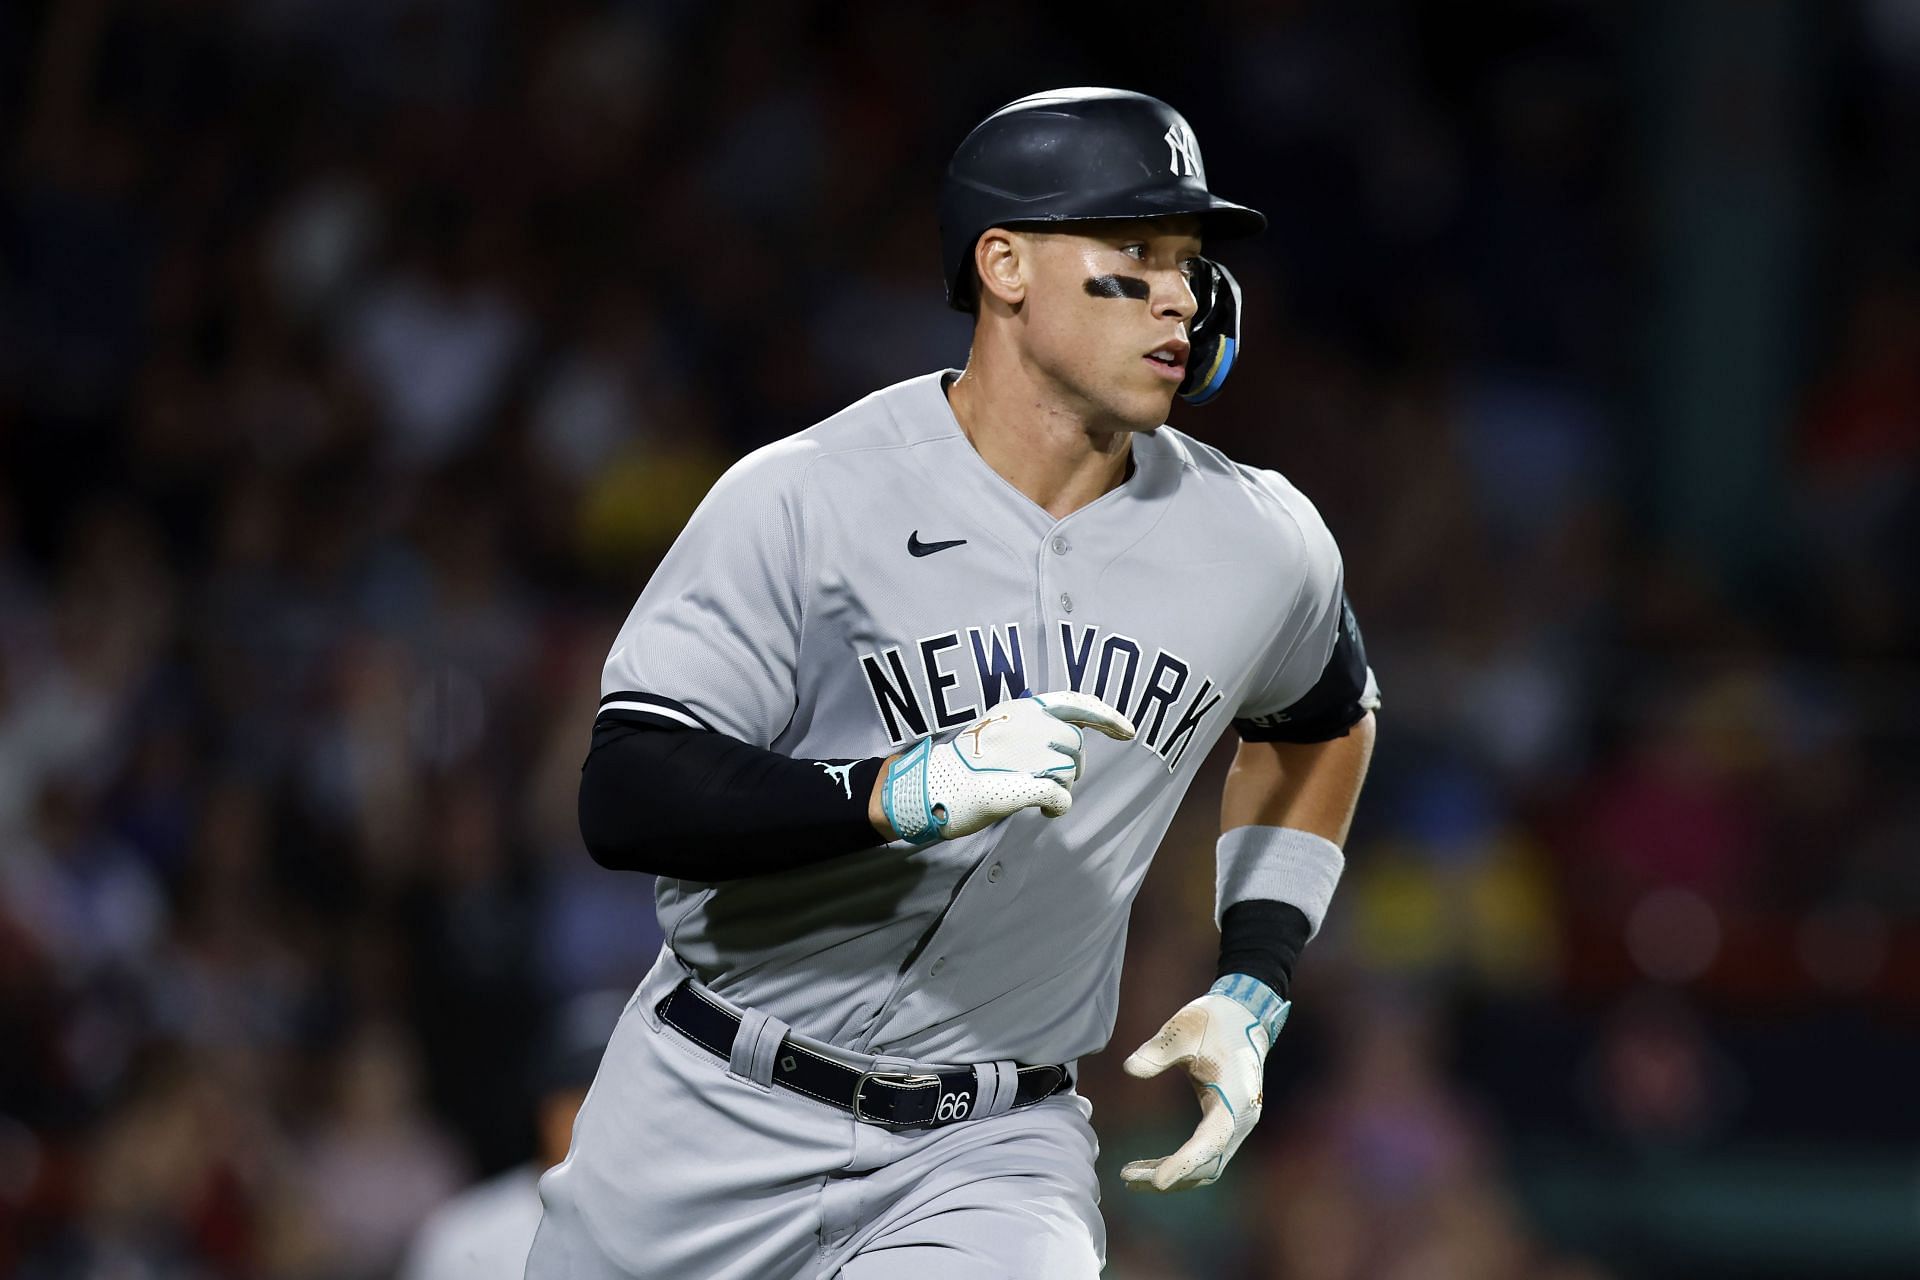 With the win, the Yankees drew even with the Red Sox at the bottom of the division at 74-73. However, the Yankees fell behind their rivals because the Red Sox won the most games against the Yankees this year.